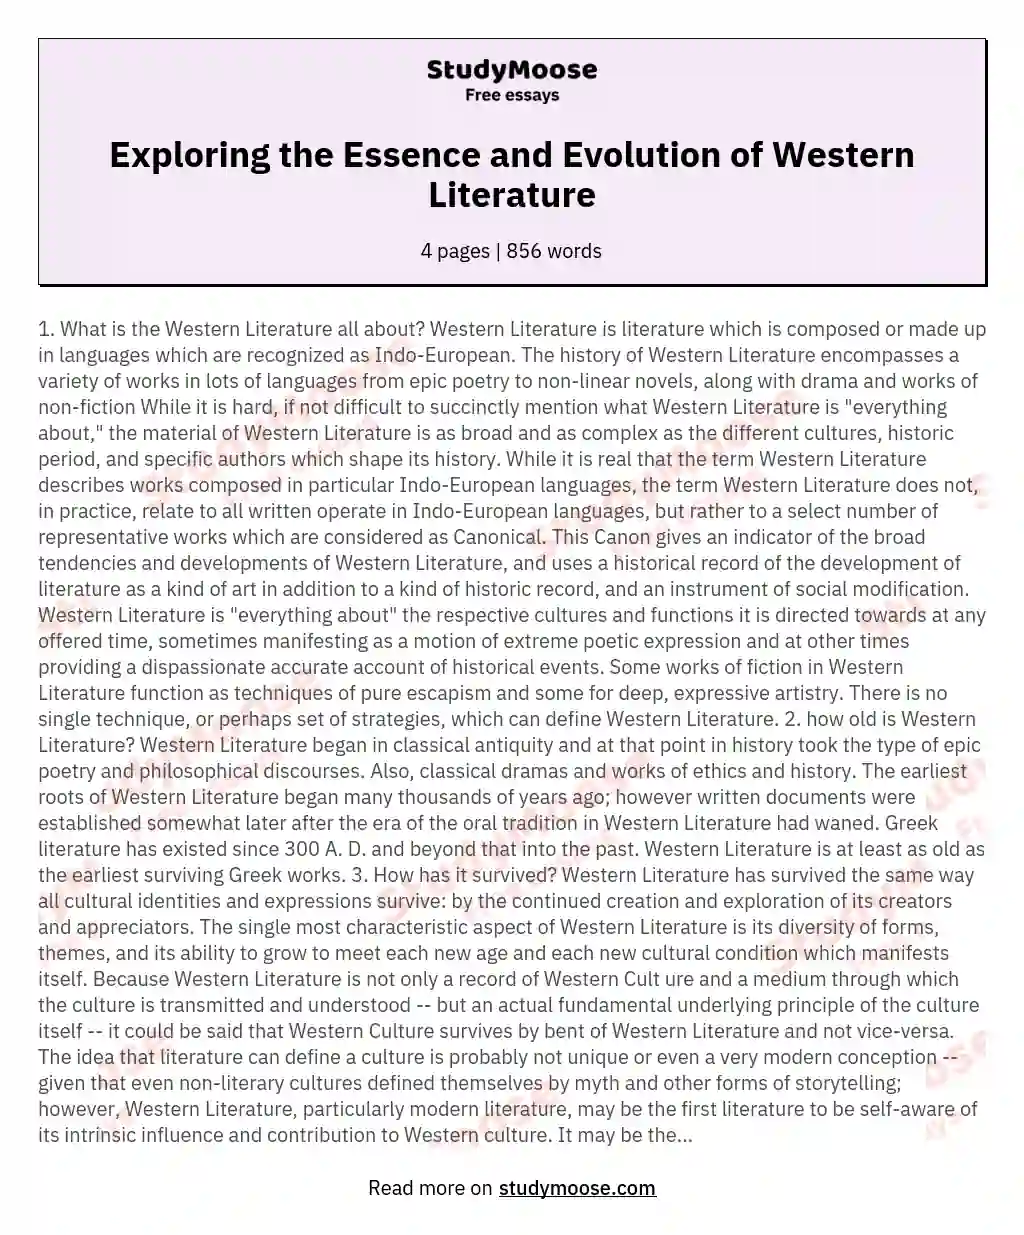 Exploring the Essence and Evolution of Western Literature essay